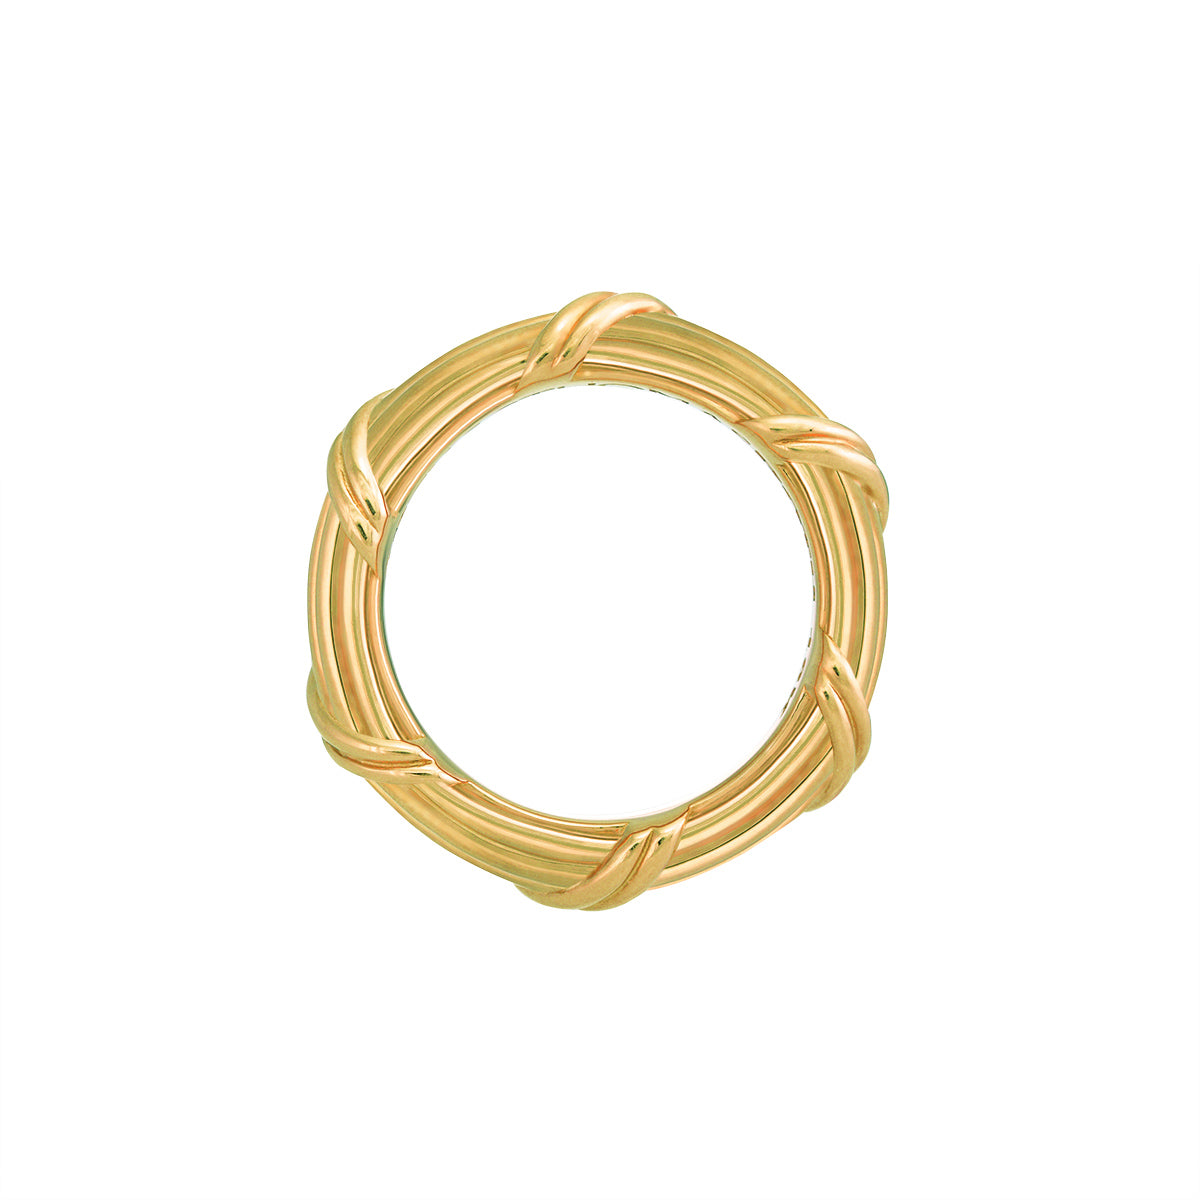 Heritage Band Ring in 18K yellow gold 4 mm sizes 11 - 14